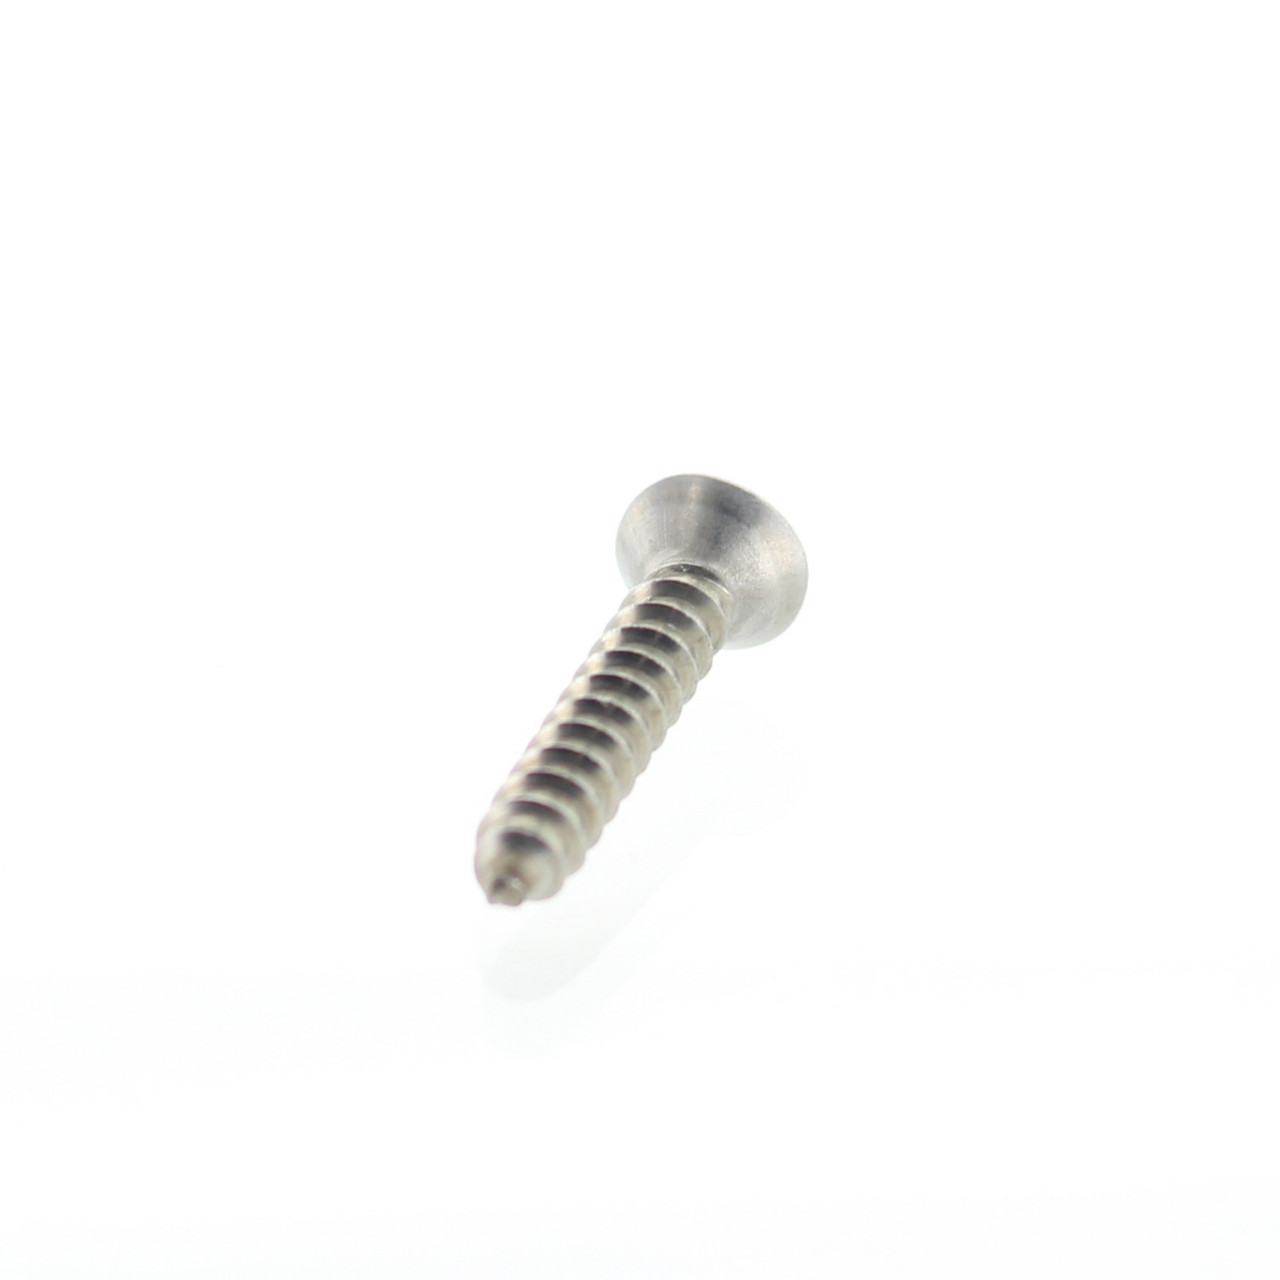 Sea-Doo New OEM Tapping Screw, Pack of 10, 204100049